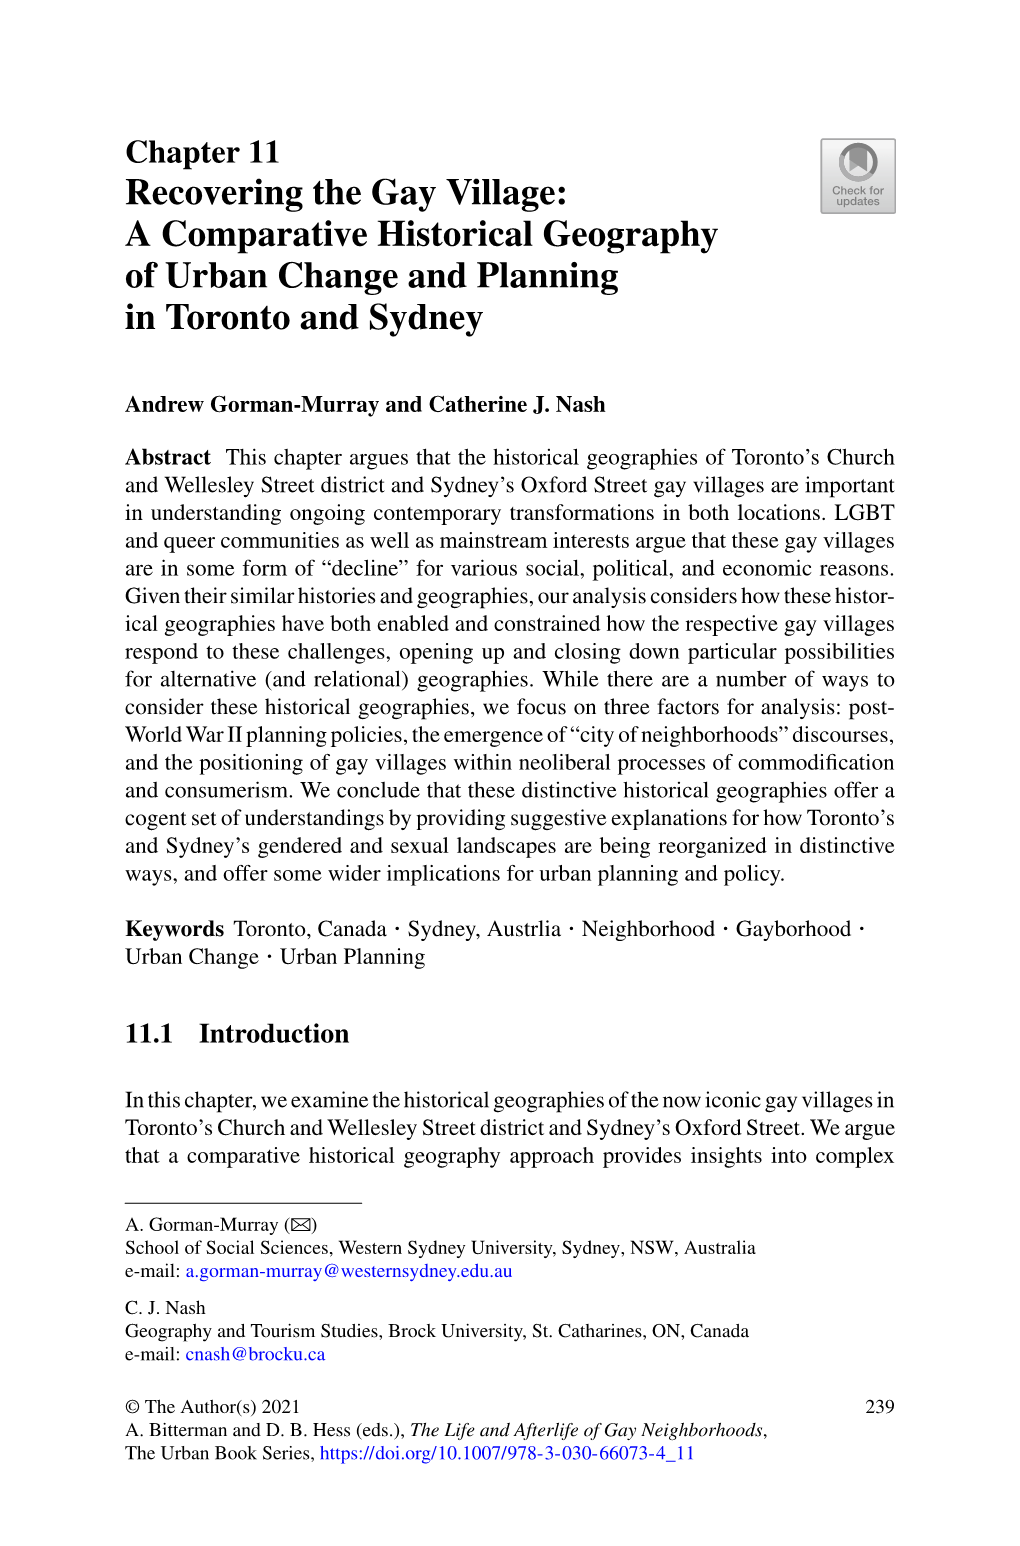 Recovering the Gay Village: a Comparative Historical Geography of Urban Change and Planning in Toronto and Sydney